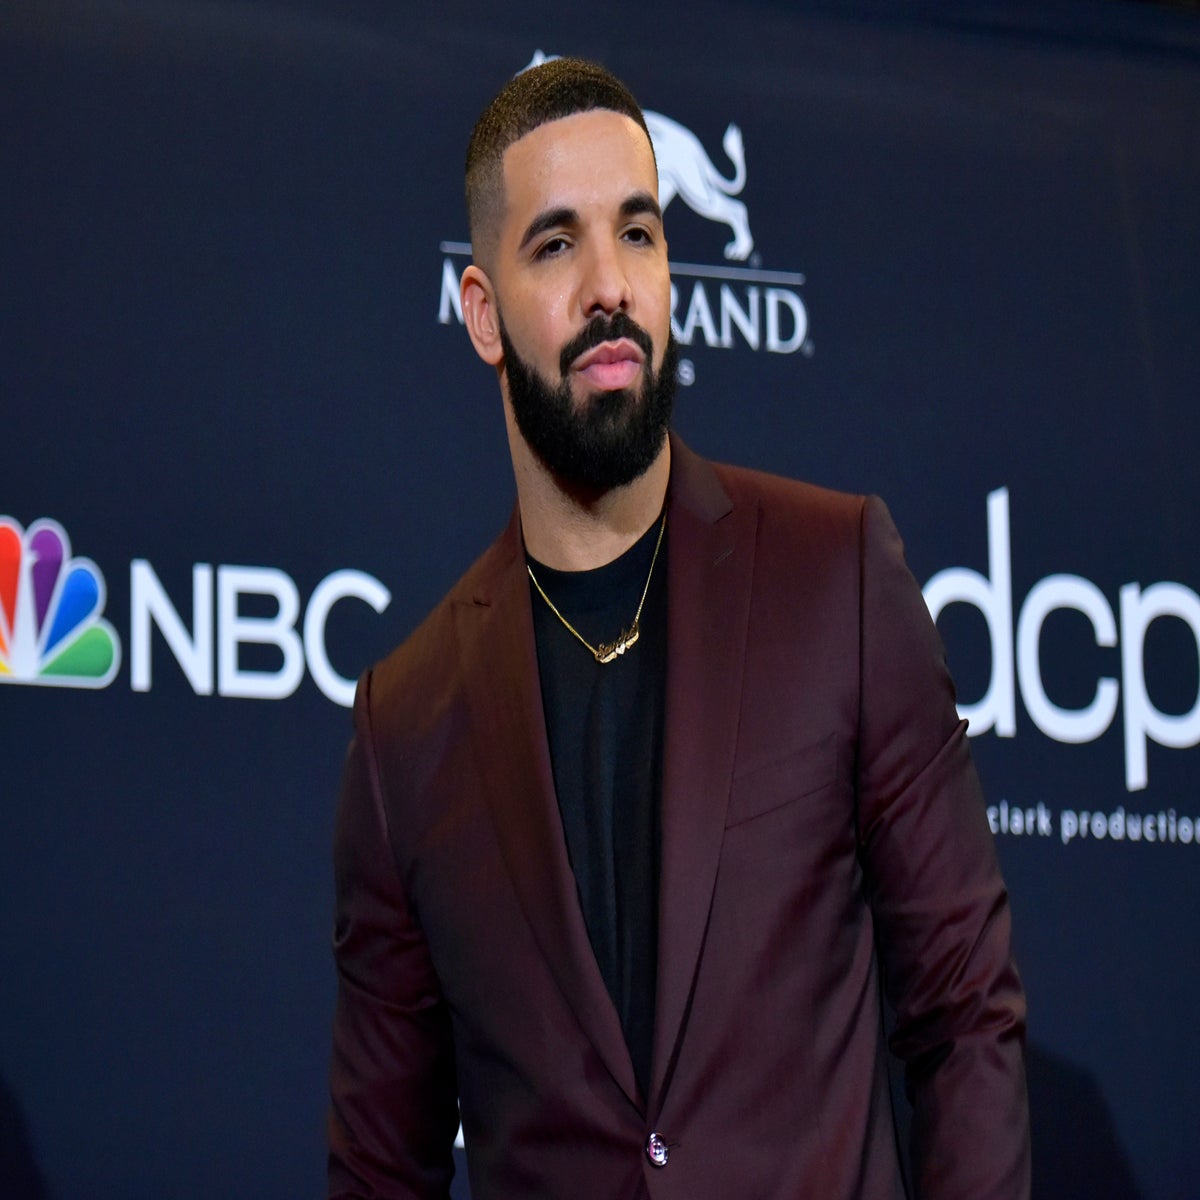 Drake 21-yeard old fan reveals private messages he sent after throwing the  36G bra onstage in New York